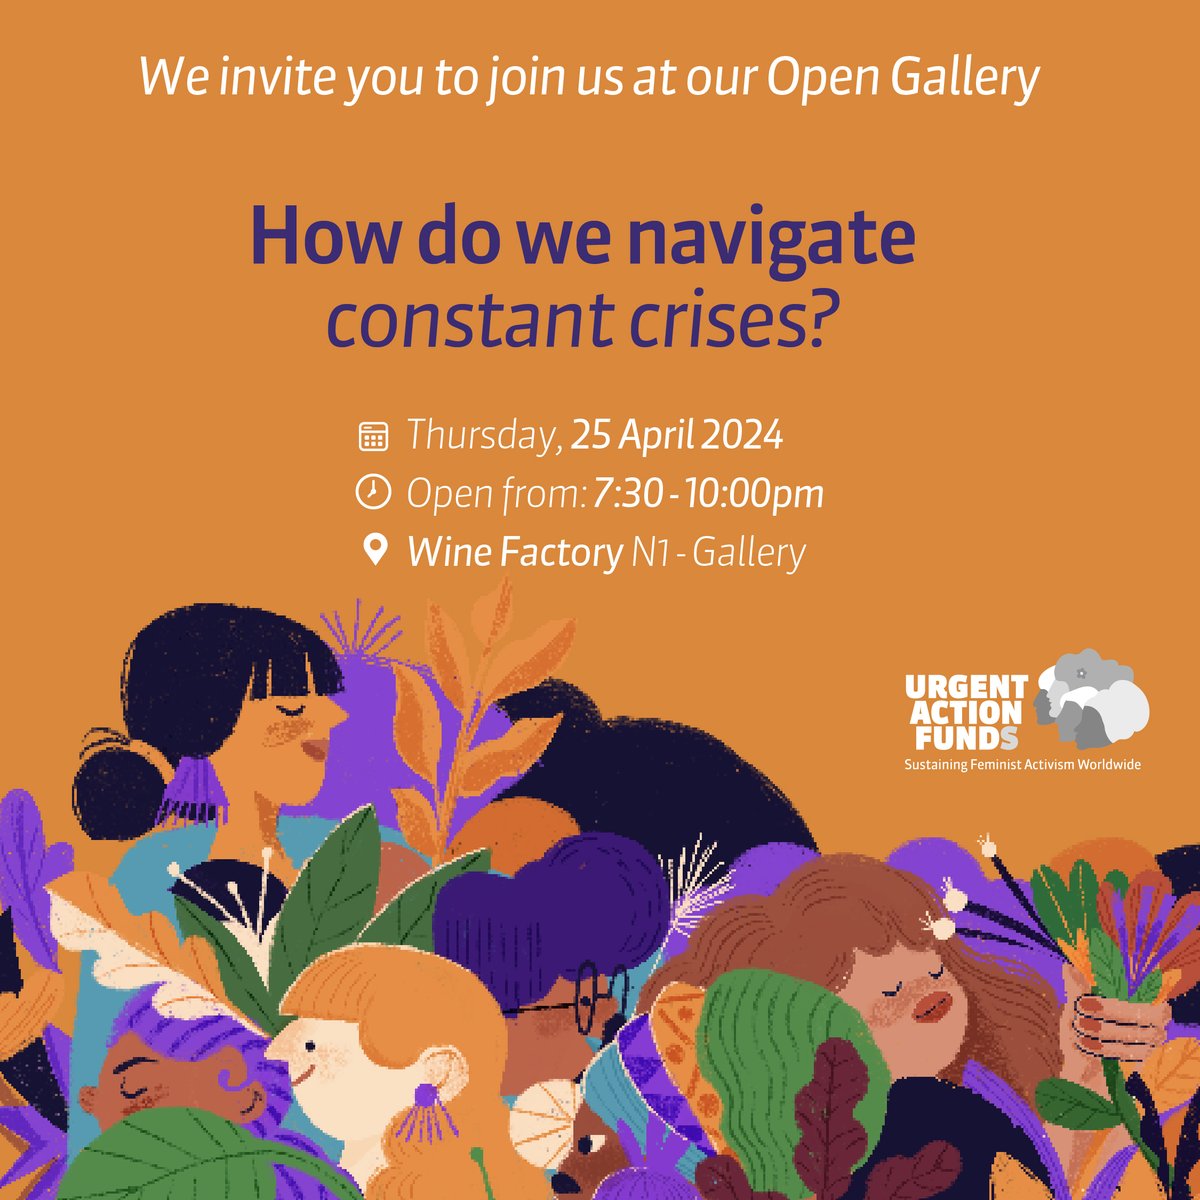 Join us at the #FundingFuturesFestival Open Galleries where our work on crisis and care comes to life. See you there! @UAFAfrica @UAF_AnP @FAU_LAC